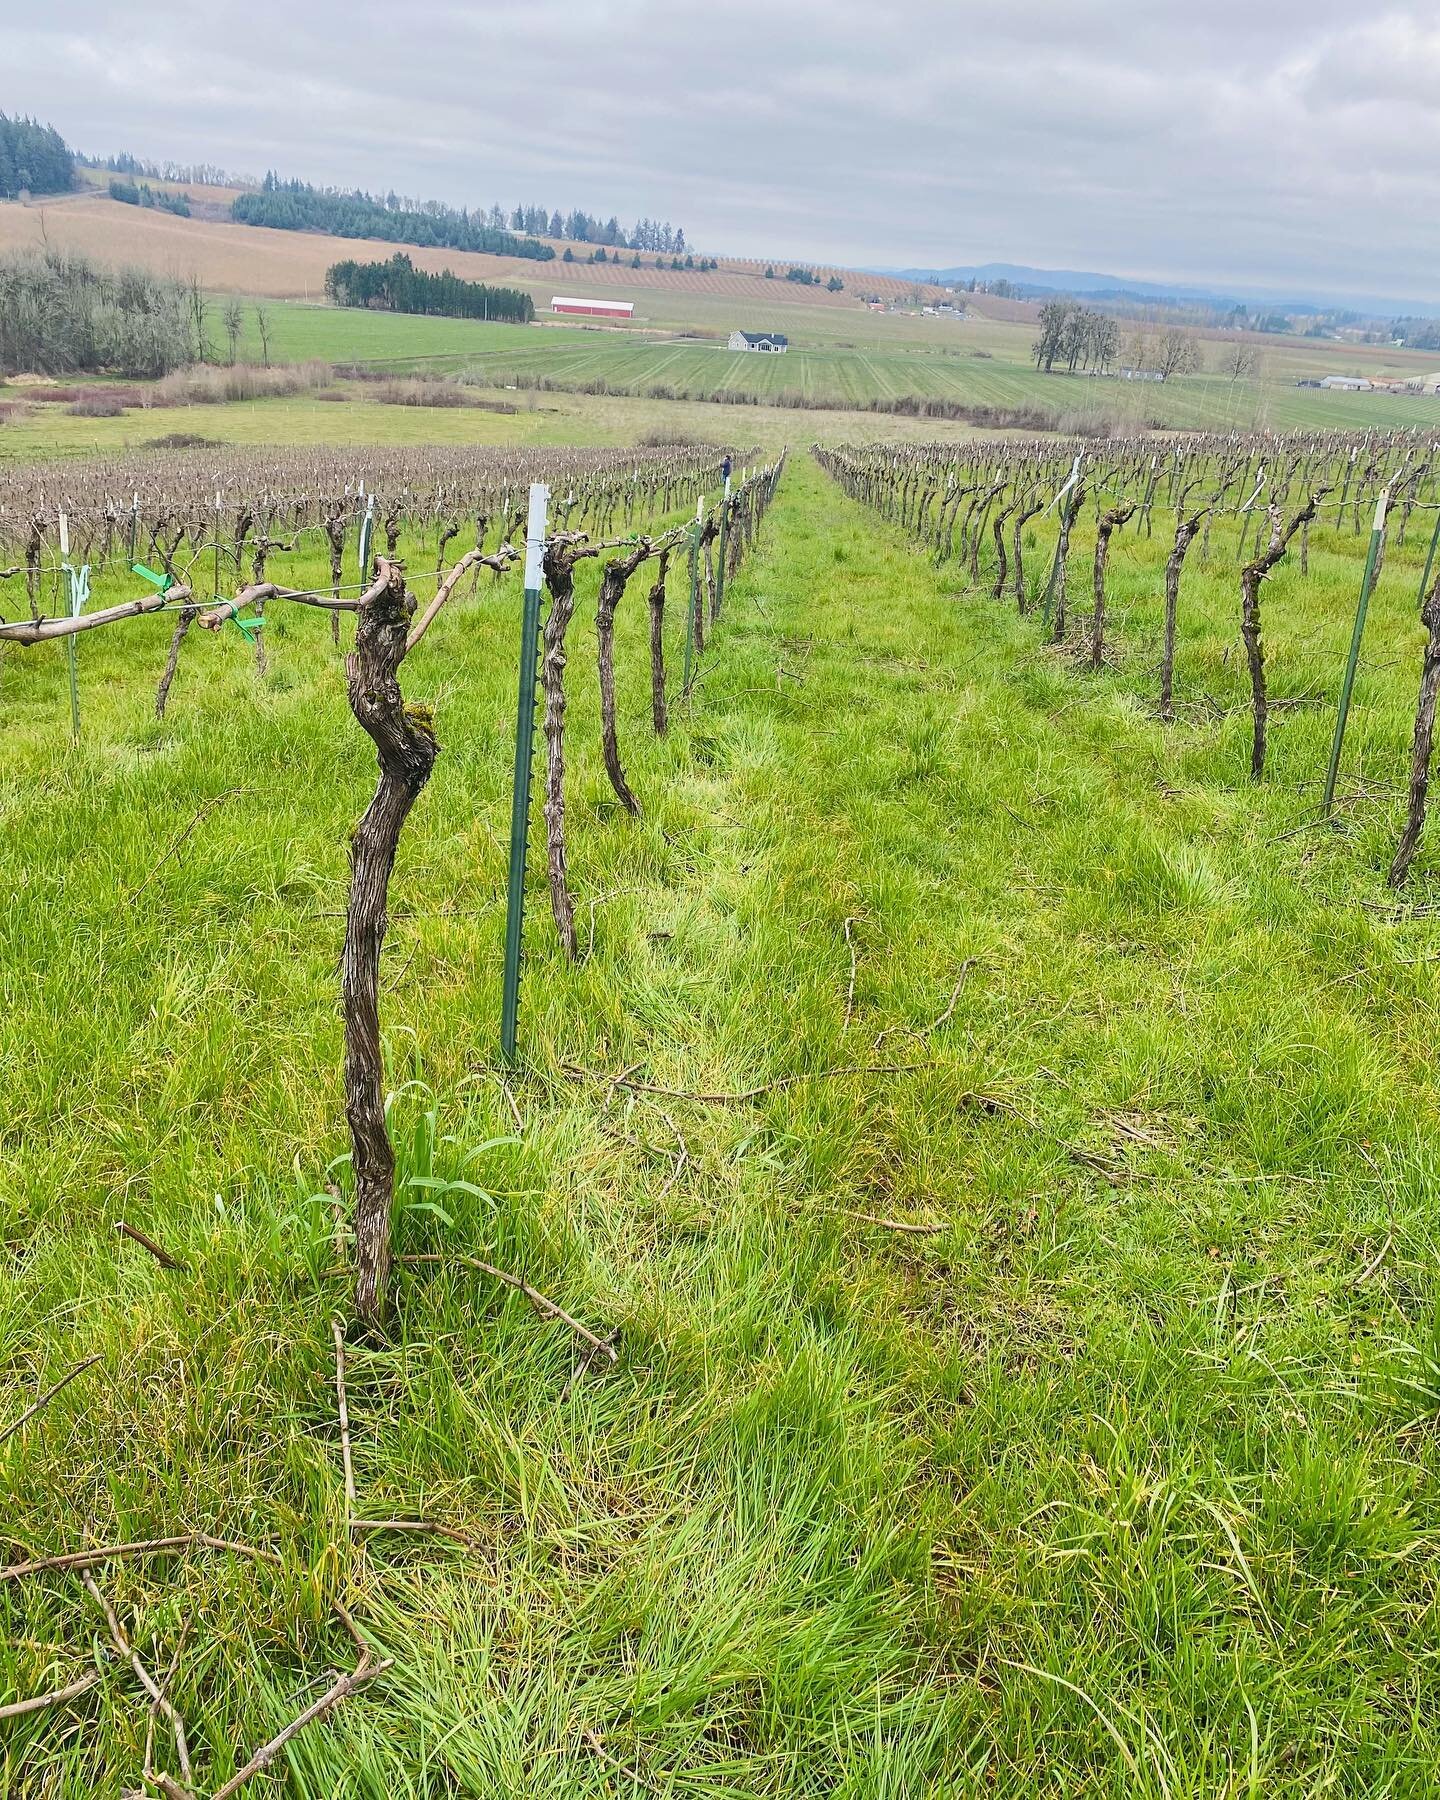 Pruning season is here! Our vines are getting prepped and ready for what we&rsquo;re hoping will be another beautiful growing season. Scroll all the way to see our pre-pruning 🪵

Come visit us this weekend and see the progress. We&rsquo;re open Satu